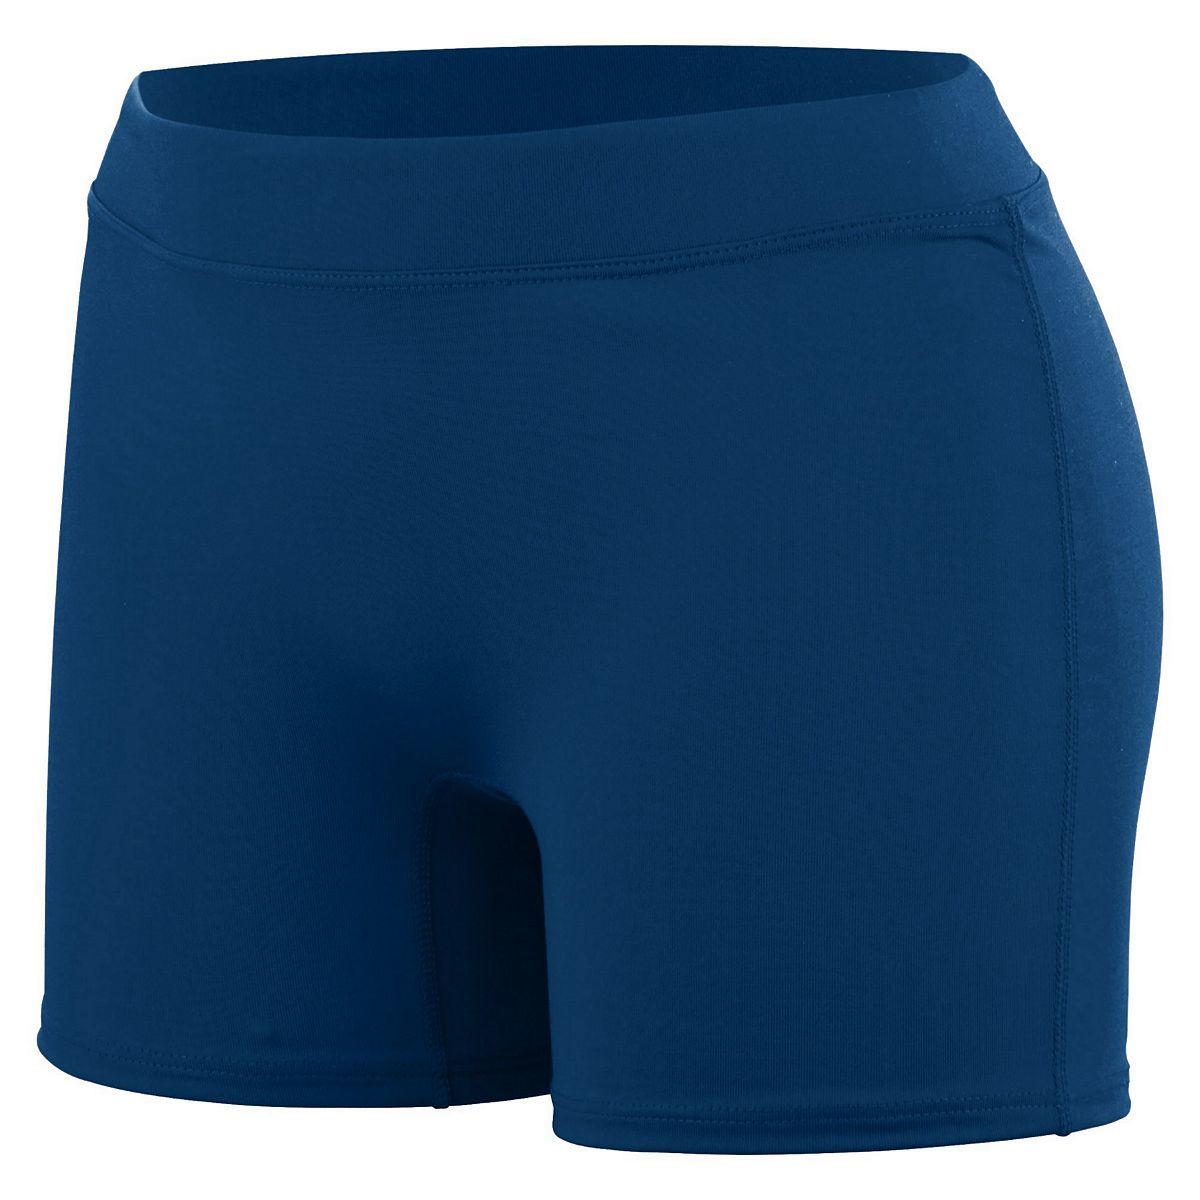 High 5 Girls Knock Out Shorts in Navy  -Part of the Girls, High5-Products, Volleyball, Girls-Shorts product lines at KanaleyCreations.com